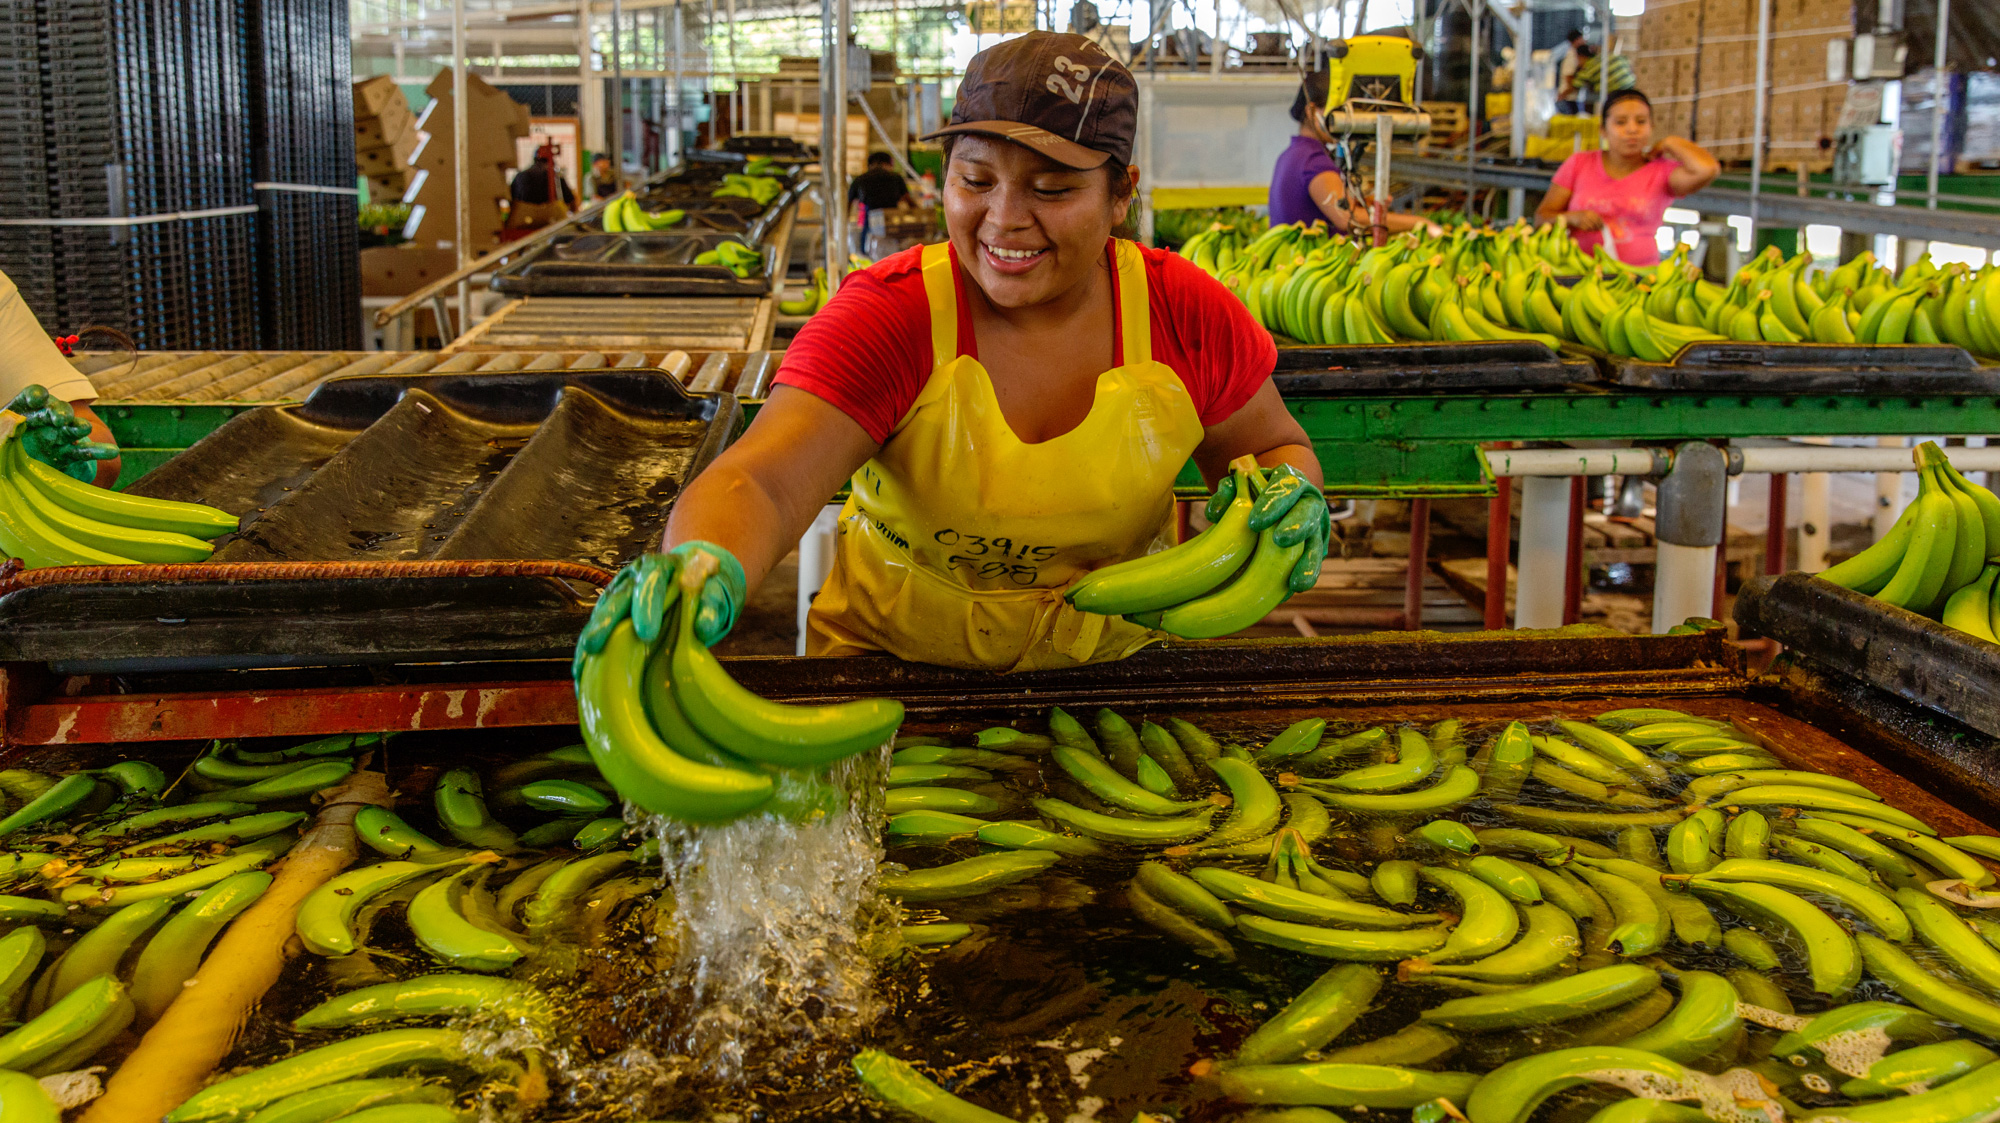 Woman cleaning bananas